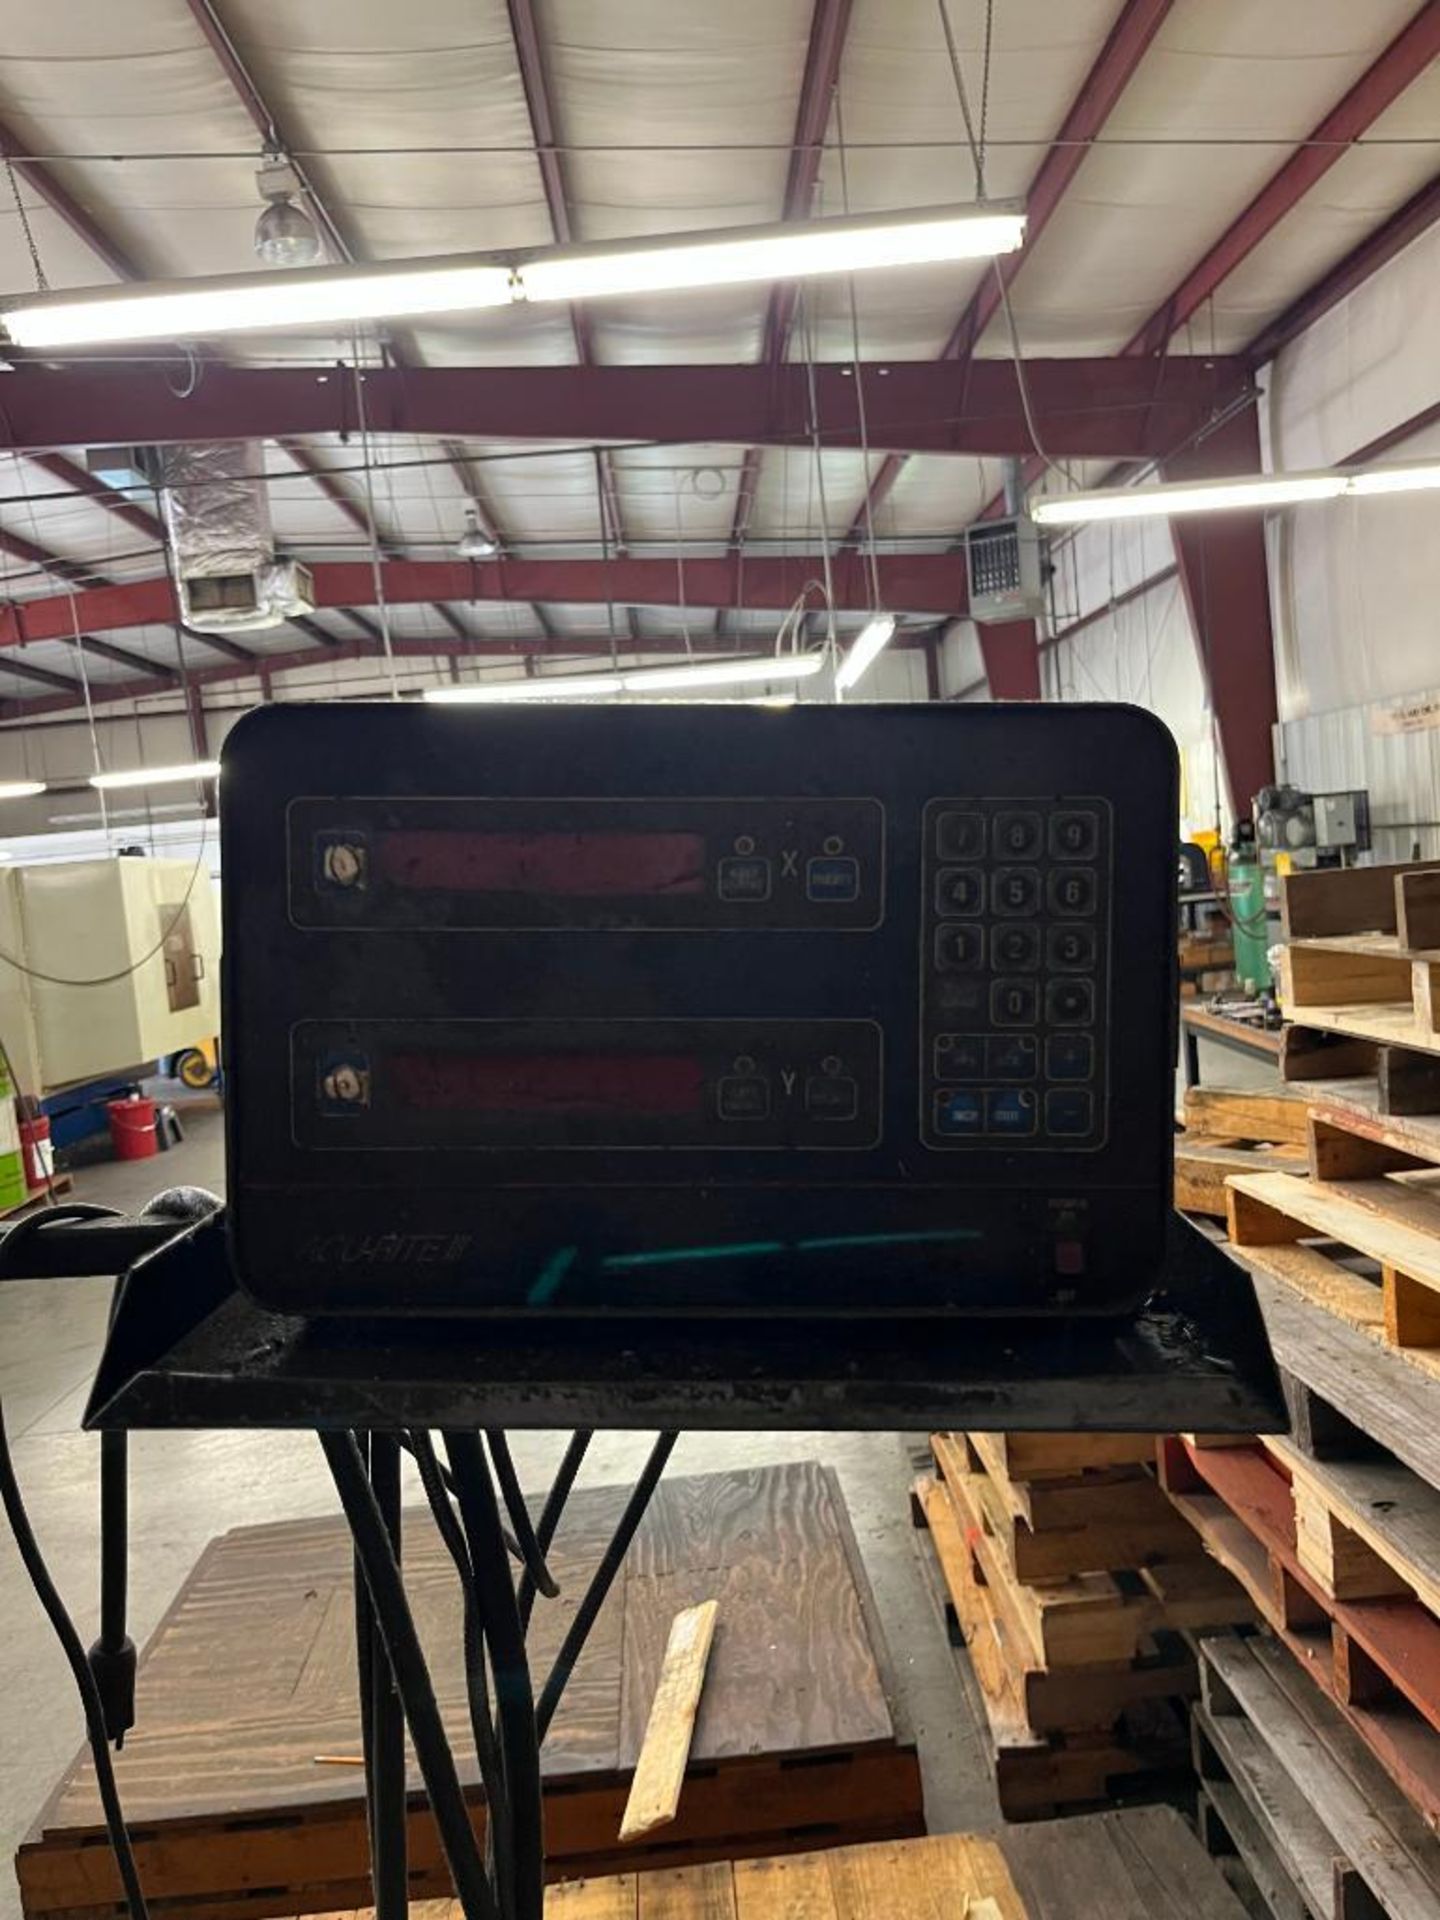 Bridgeport mill, auto position table, 42" x 9" table, accu-rite iii control unit - Image 4 of 4